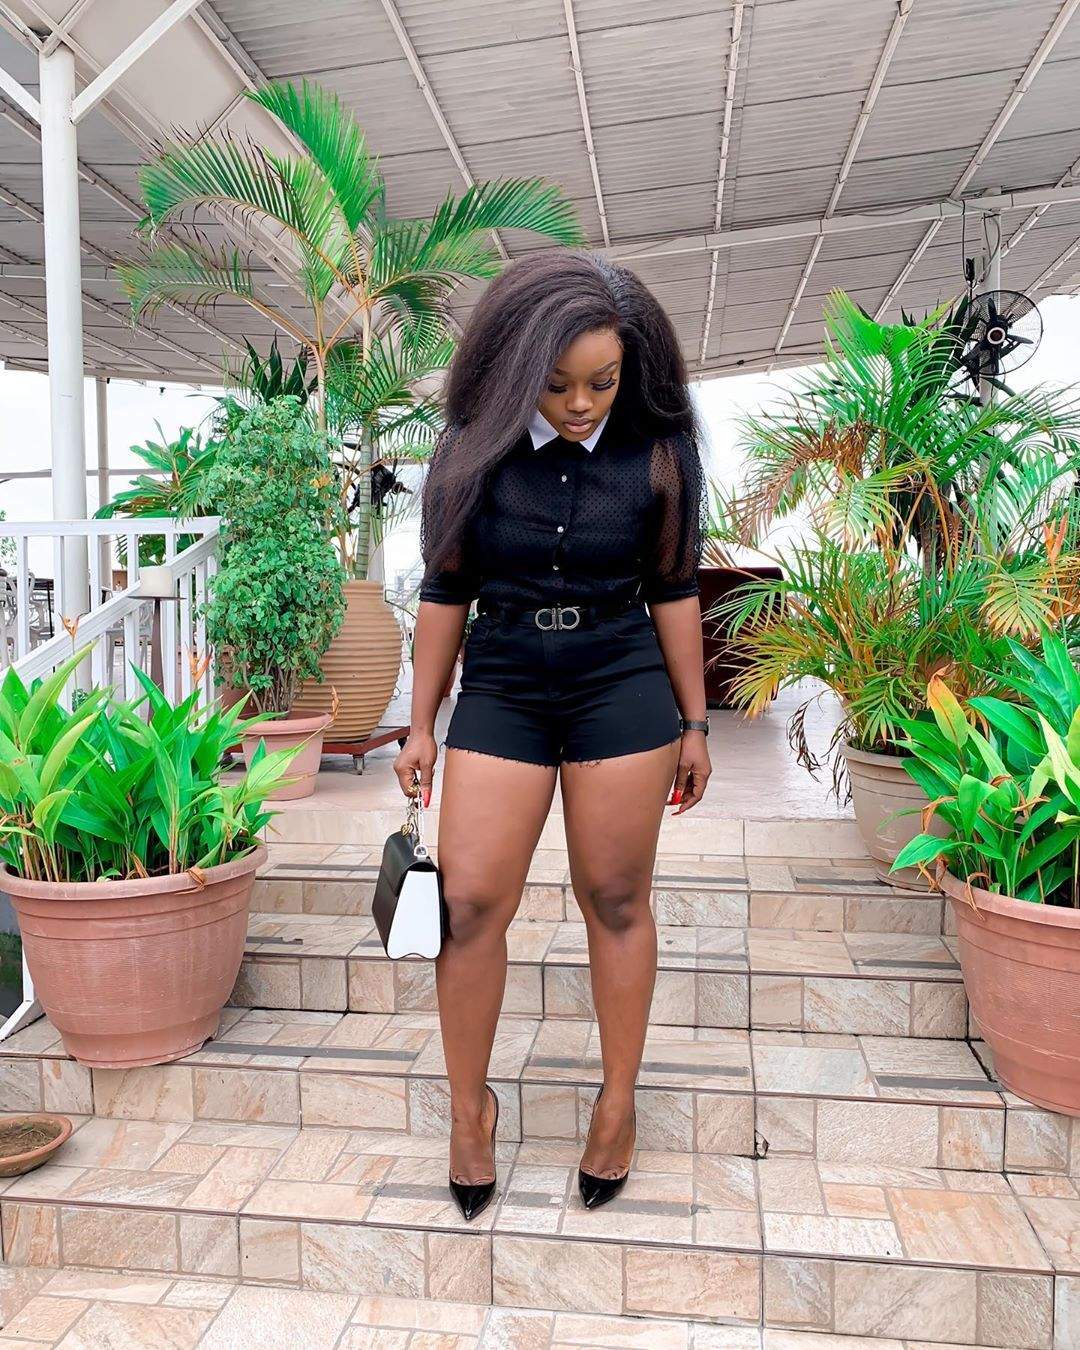 Cee-C looks smoking hot as she steps out in bum shorts (Photos)